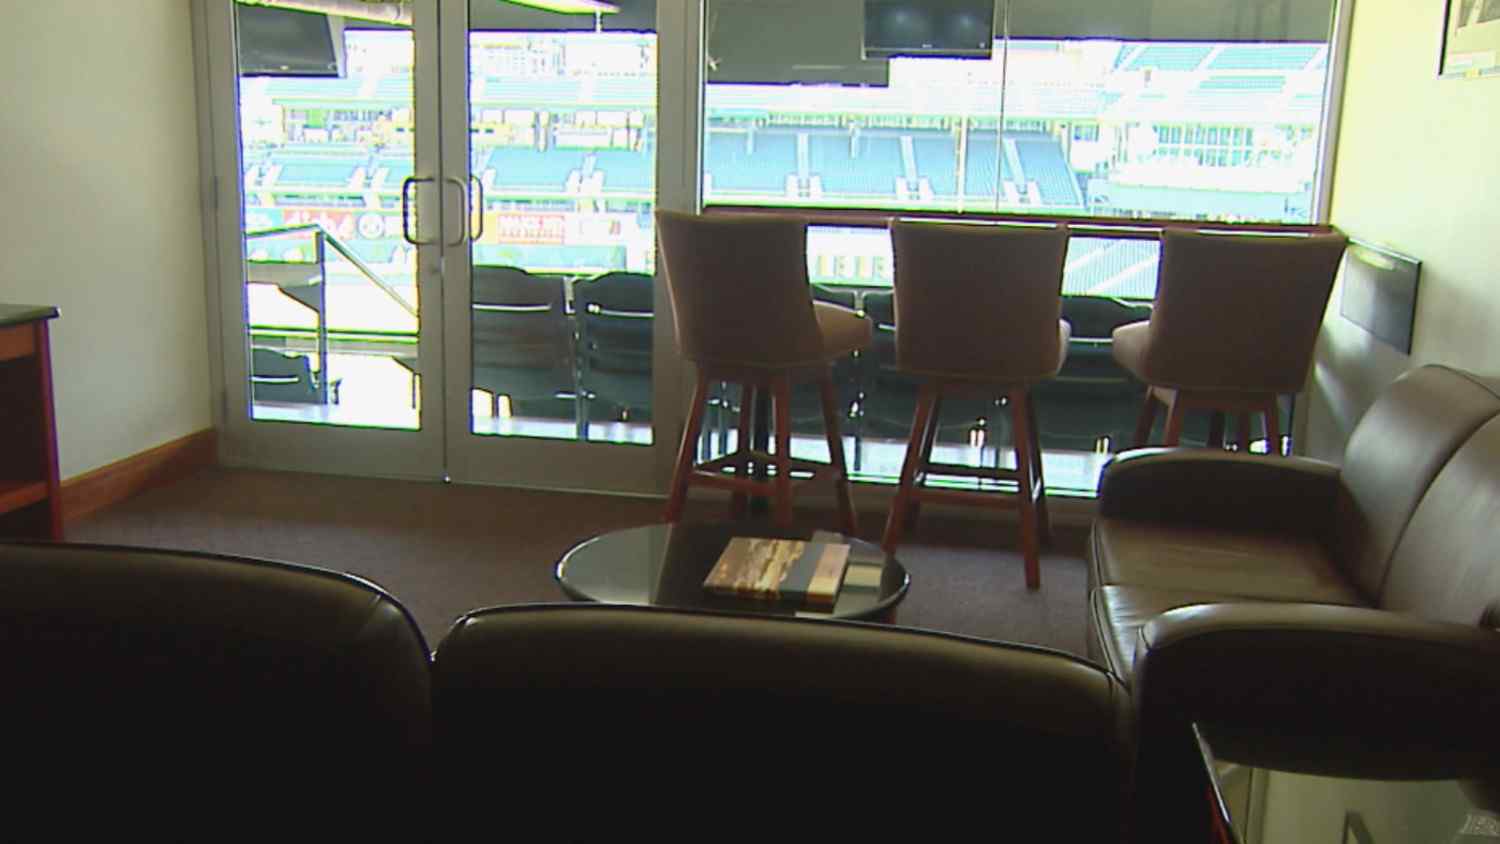 tennessee titans suite tickets